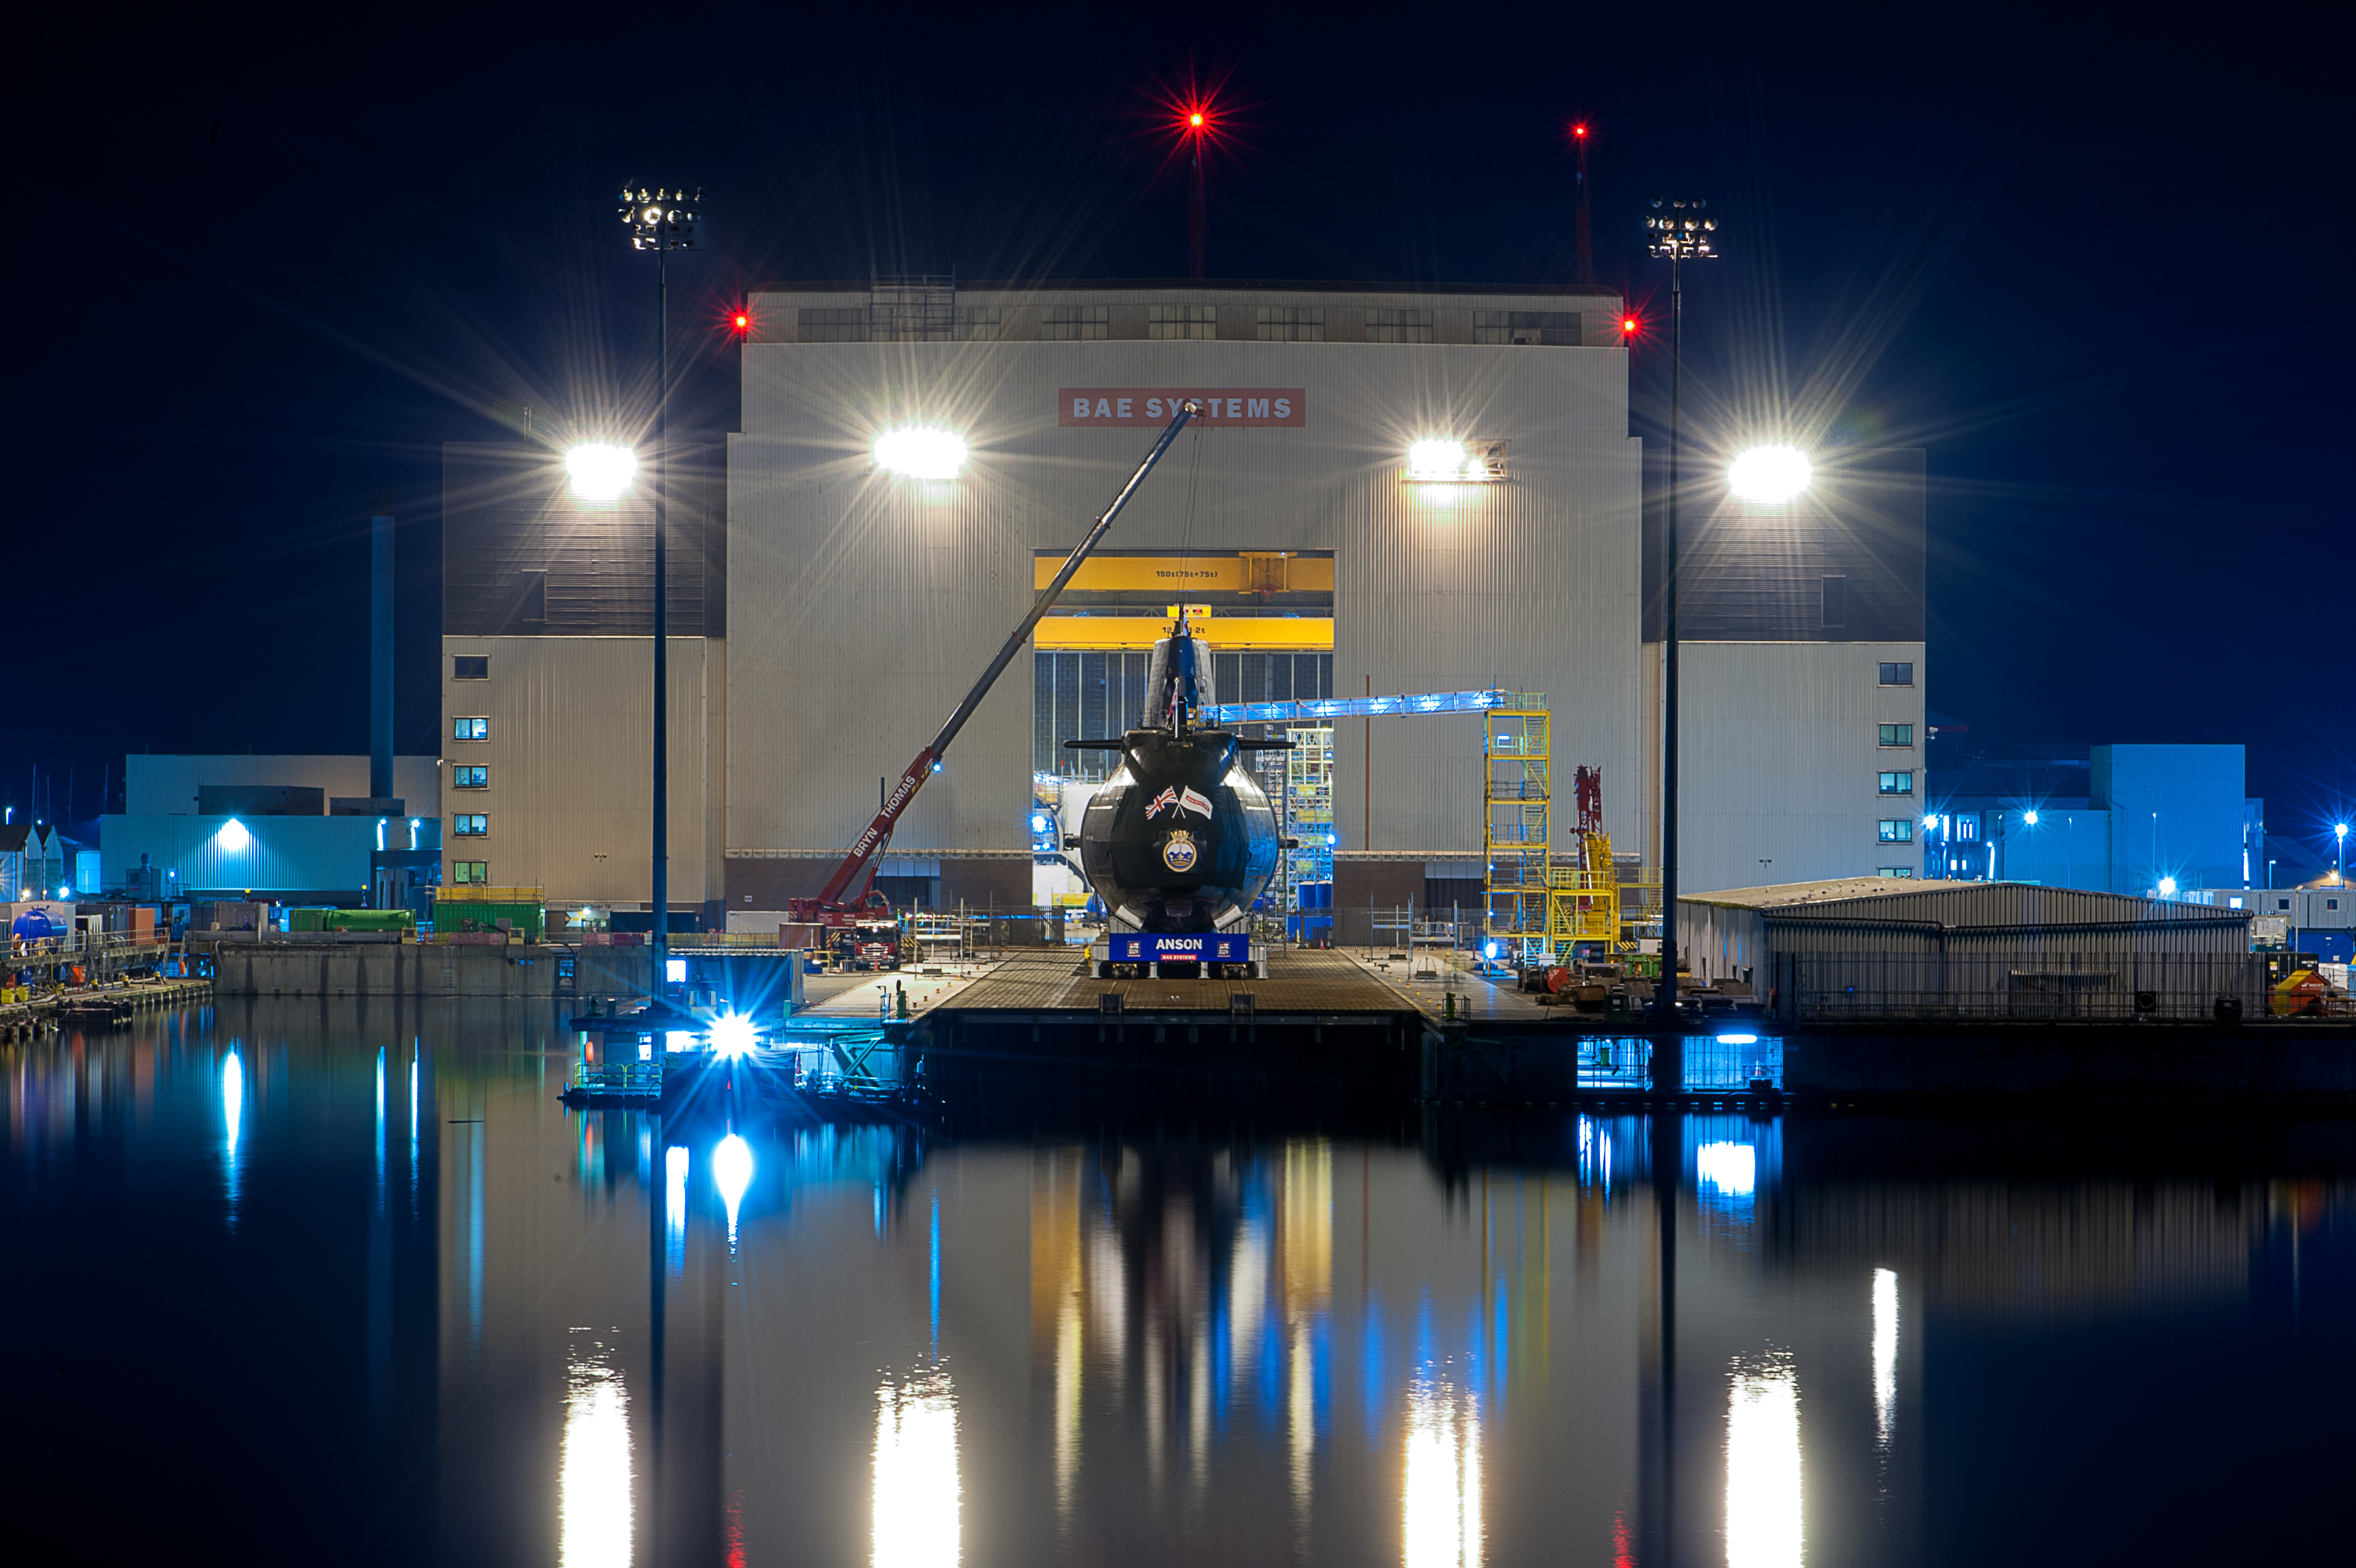 HMS Anson (S123) Submarine Enters Final Stage of Construction and Commissioning